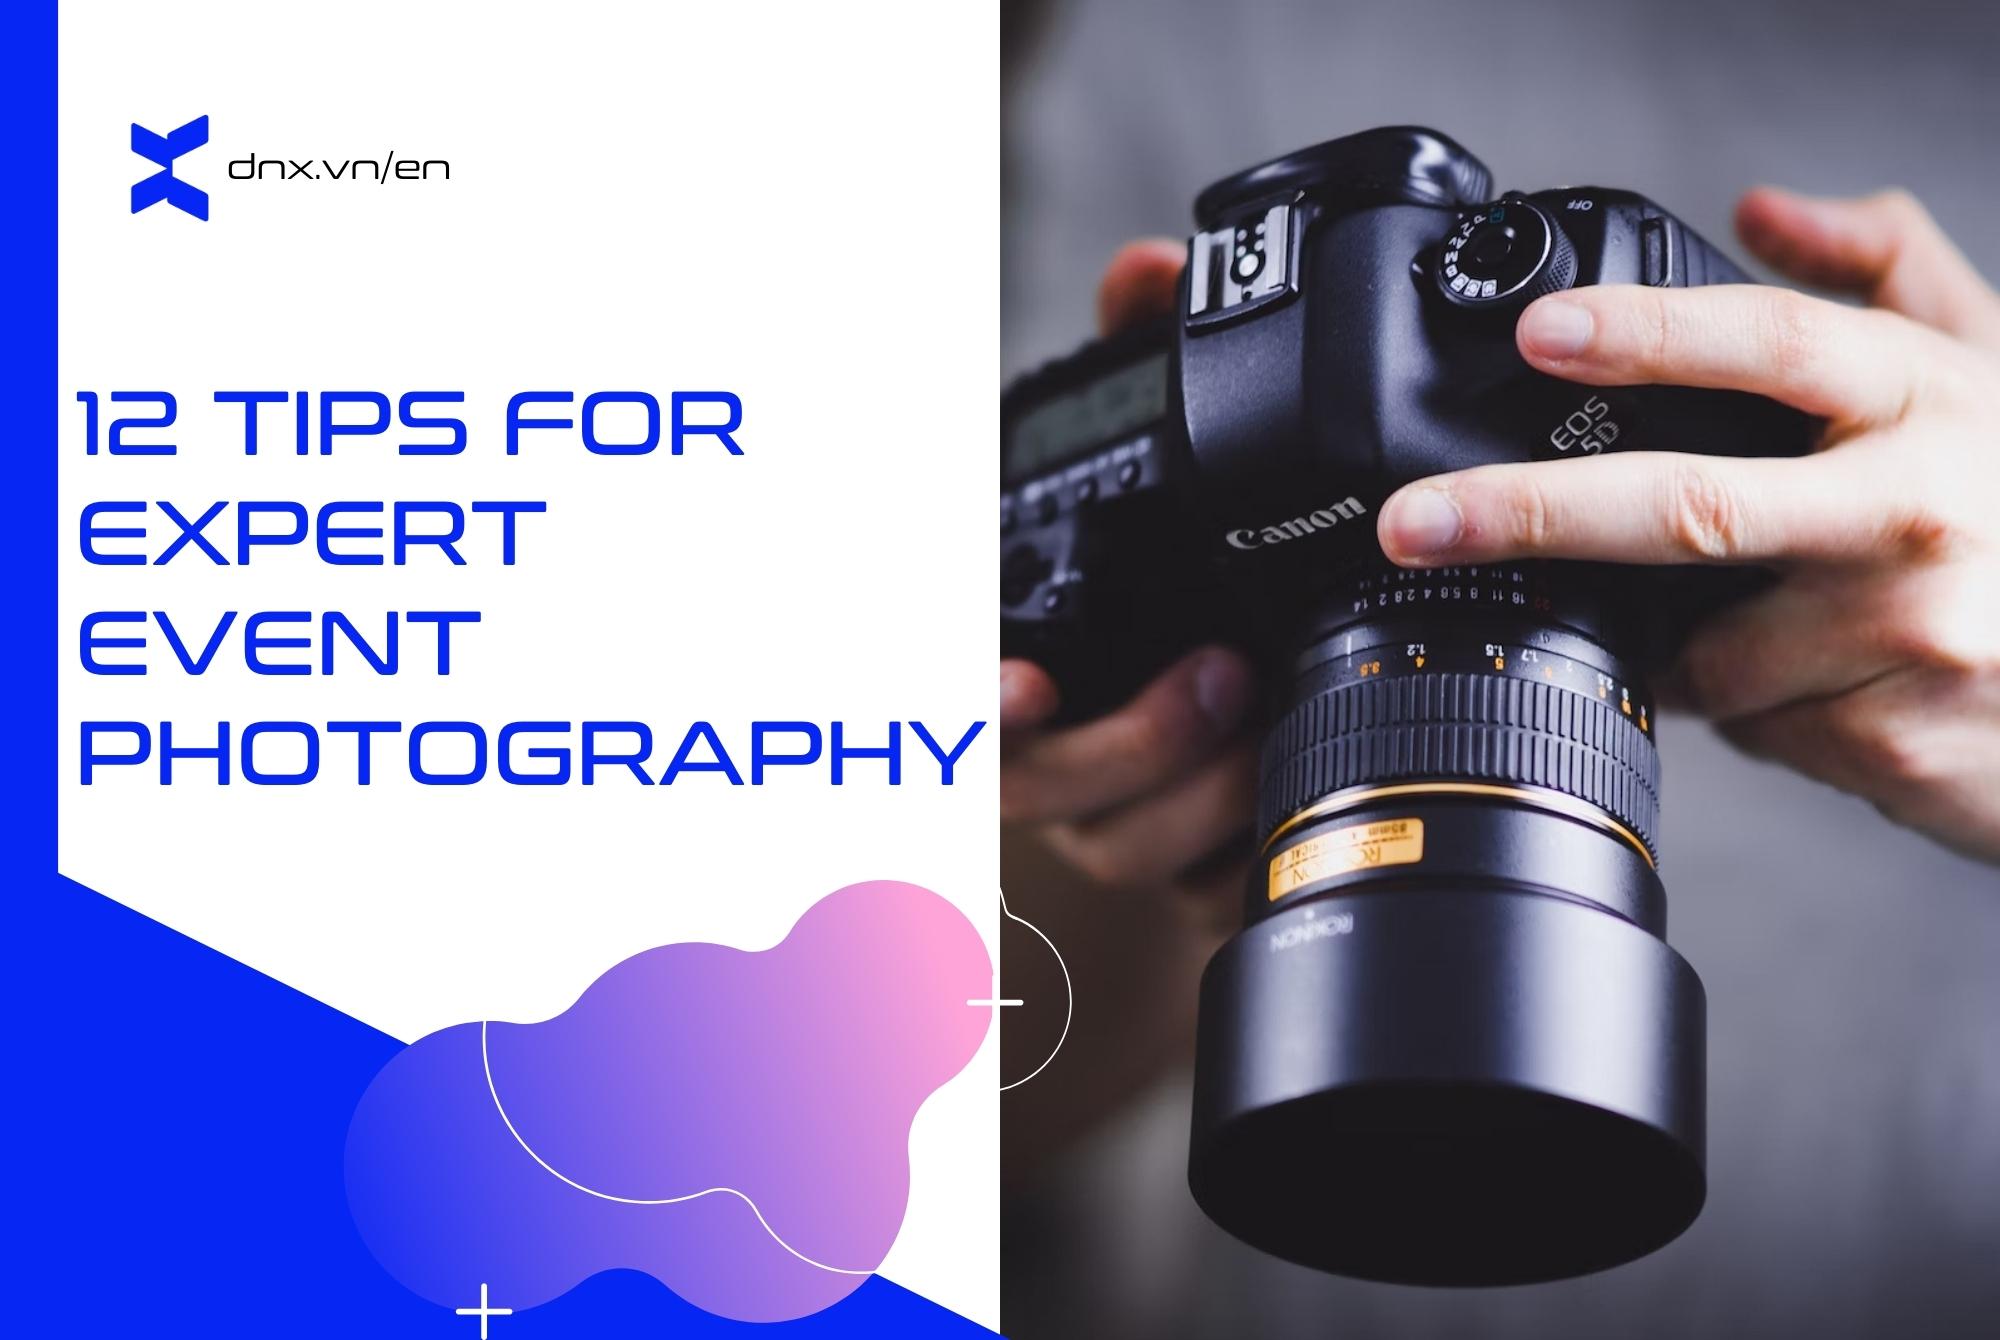 12 tips for expert event photography